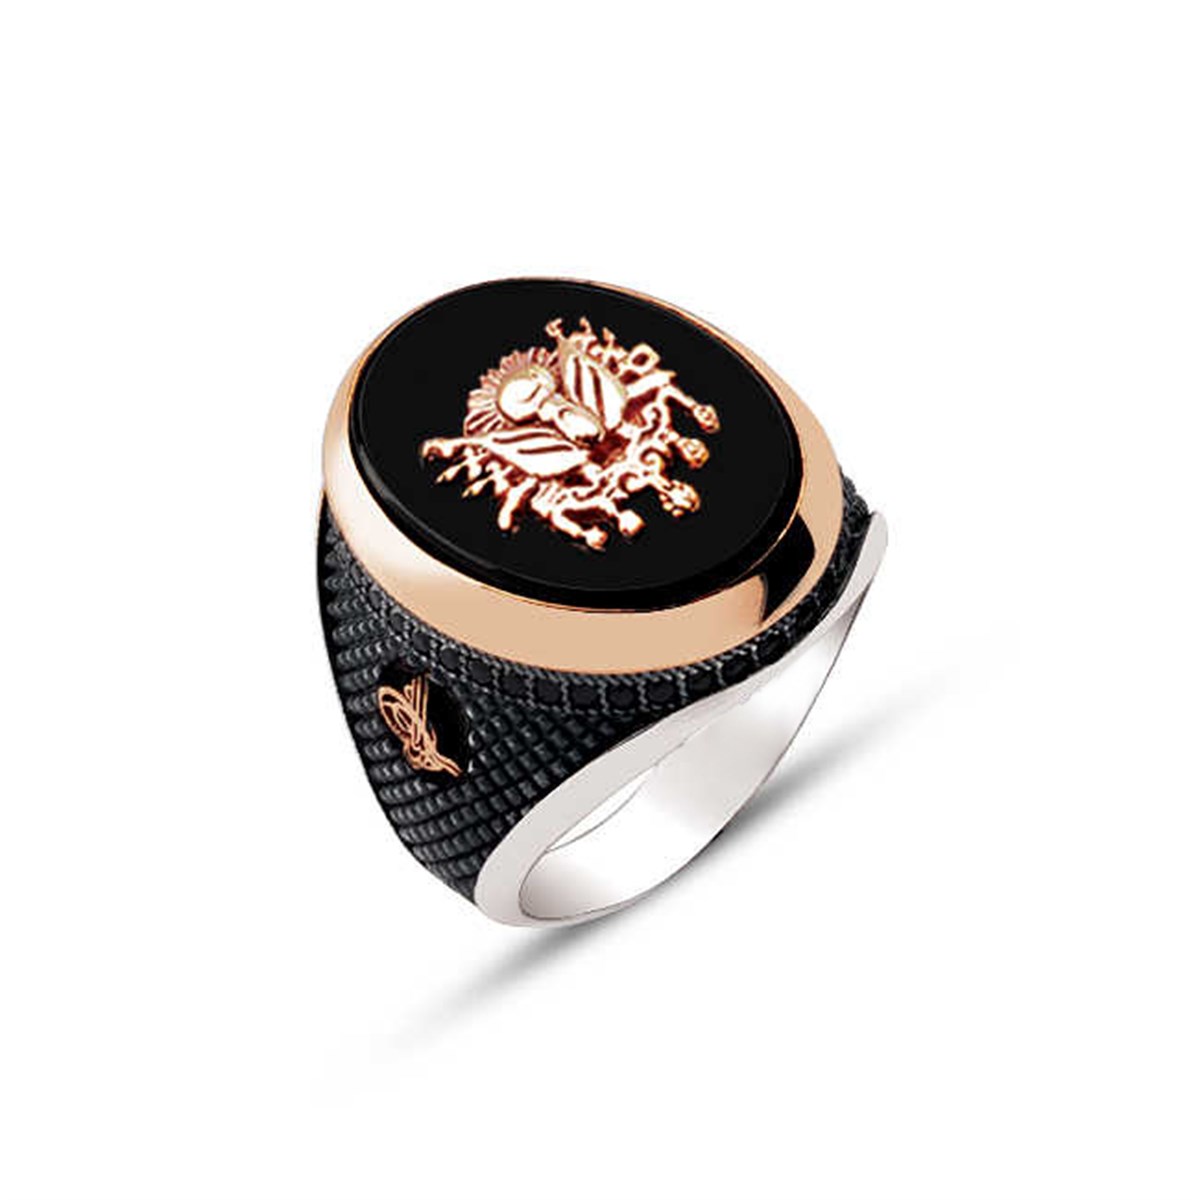 Silver Black Onix Stone Embroidered Men's Ring